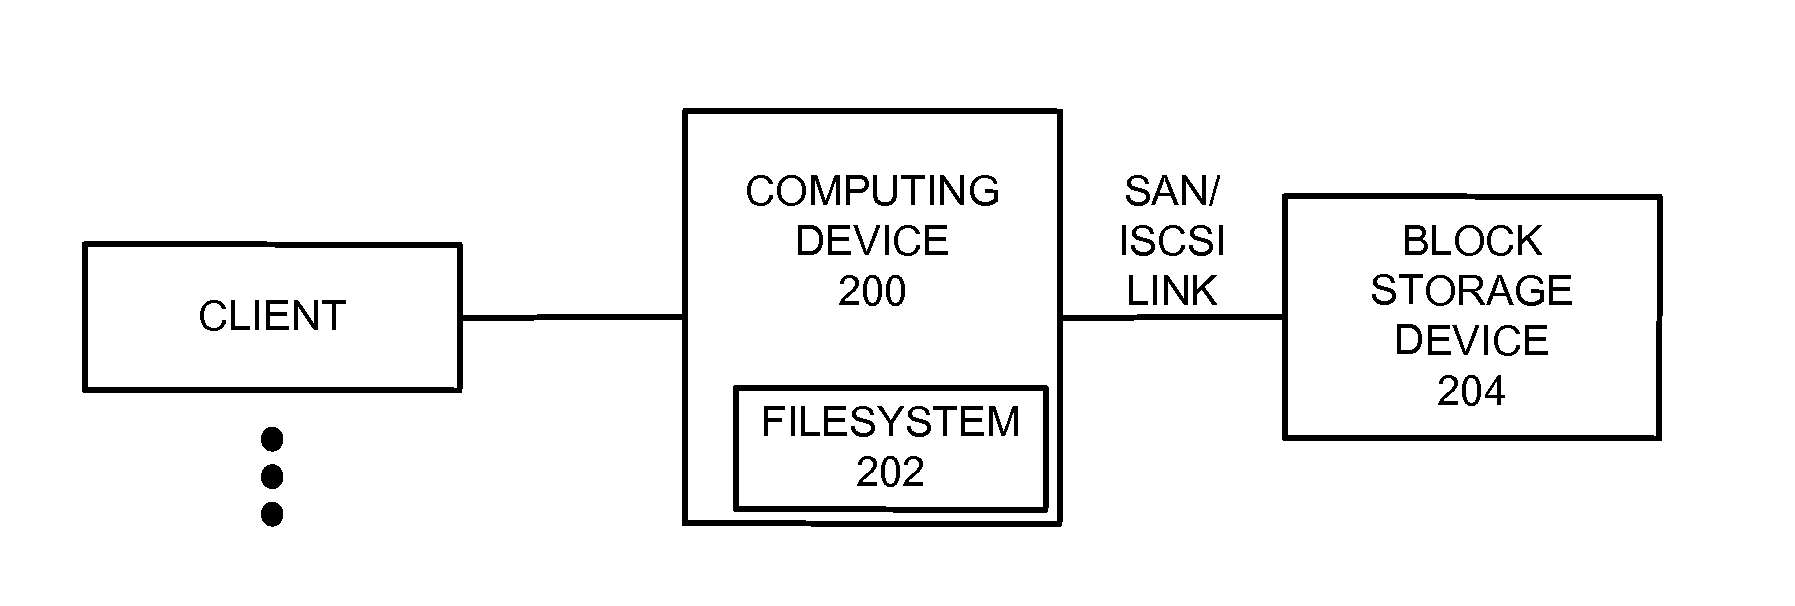 Distributing data for a distributed filesystem across multiple cloud storage systems